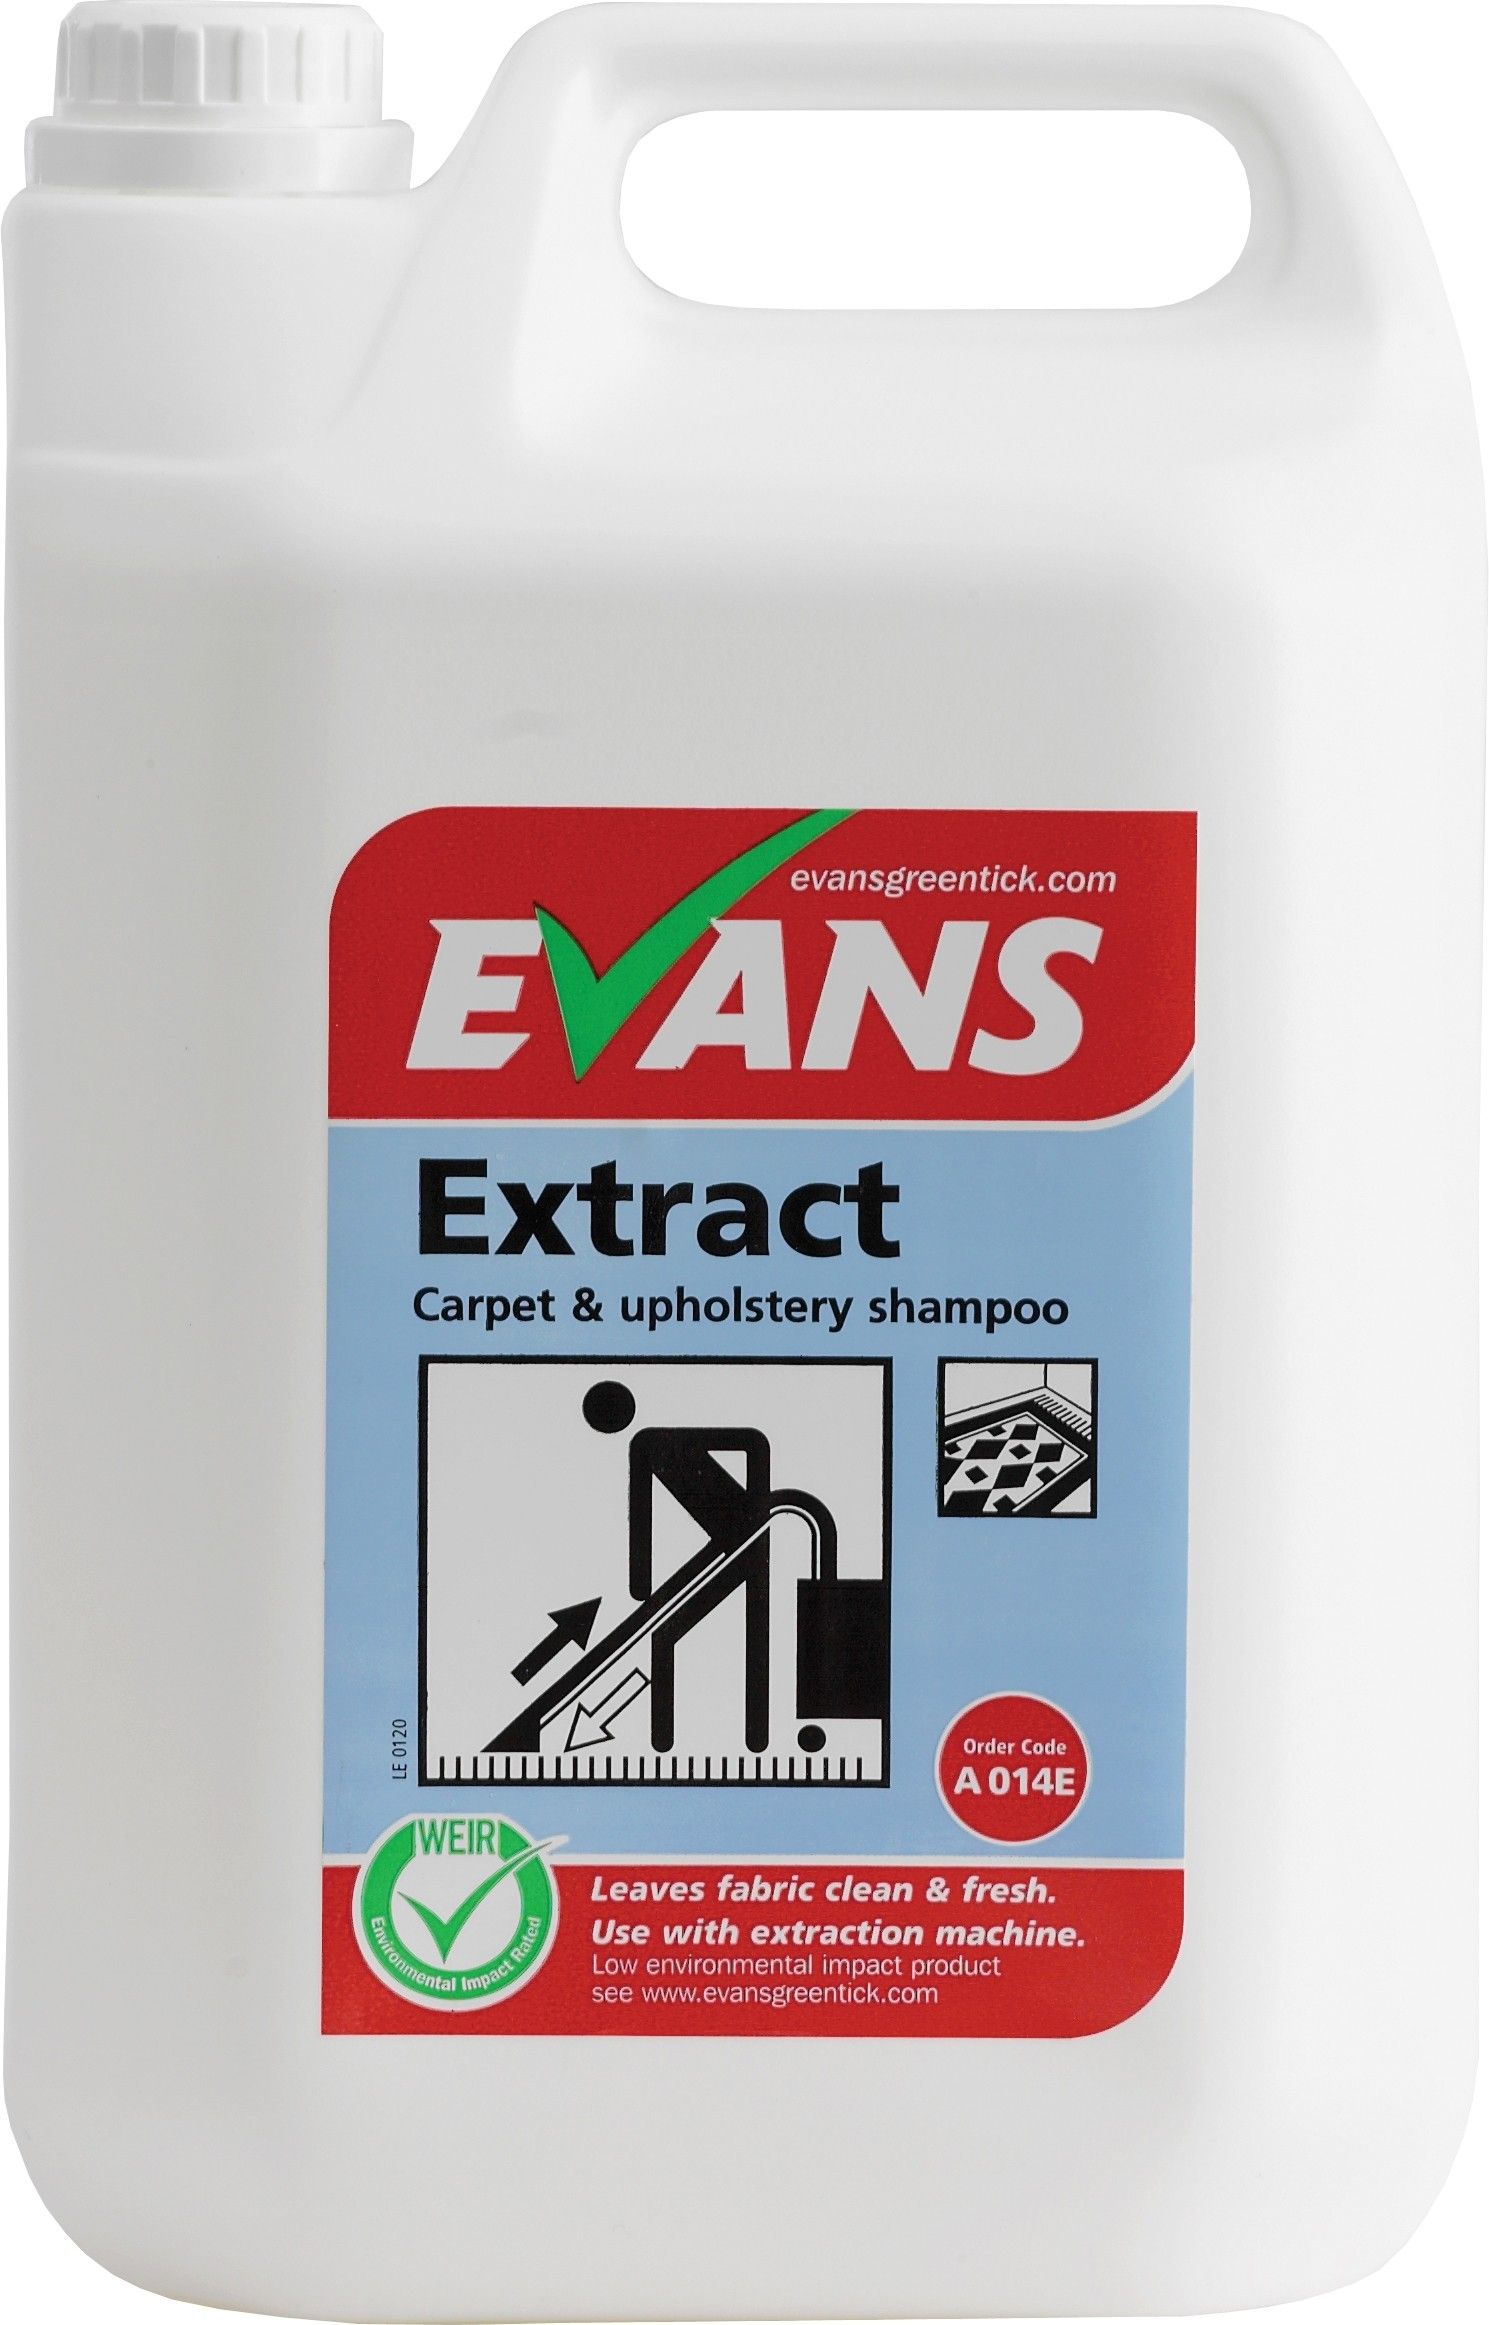 Evans Extract Pro - Carpet & Upholstery Shampoo 5 Ltr